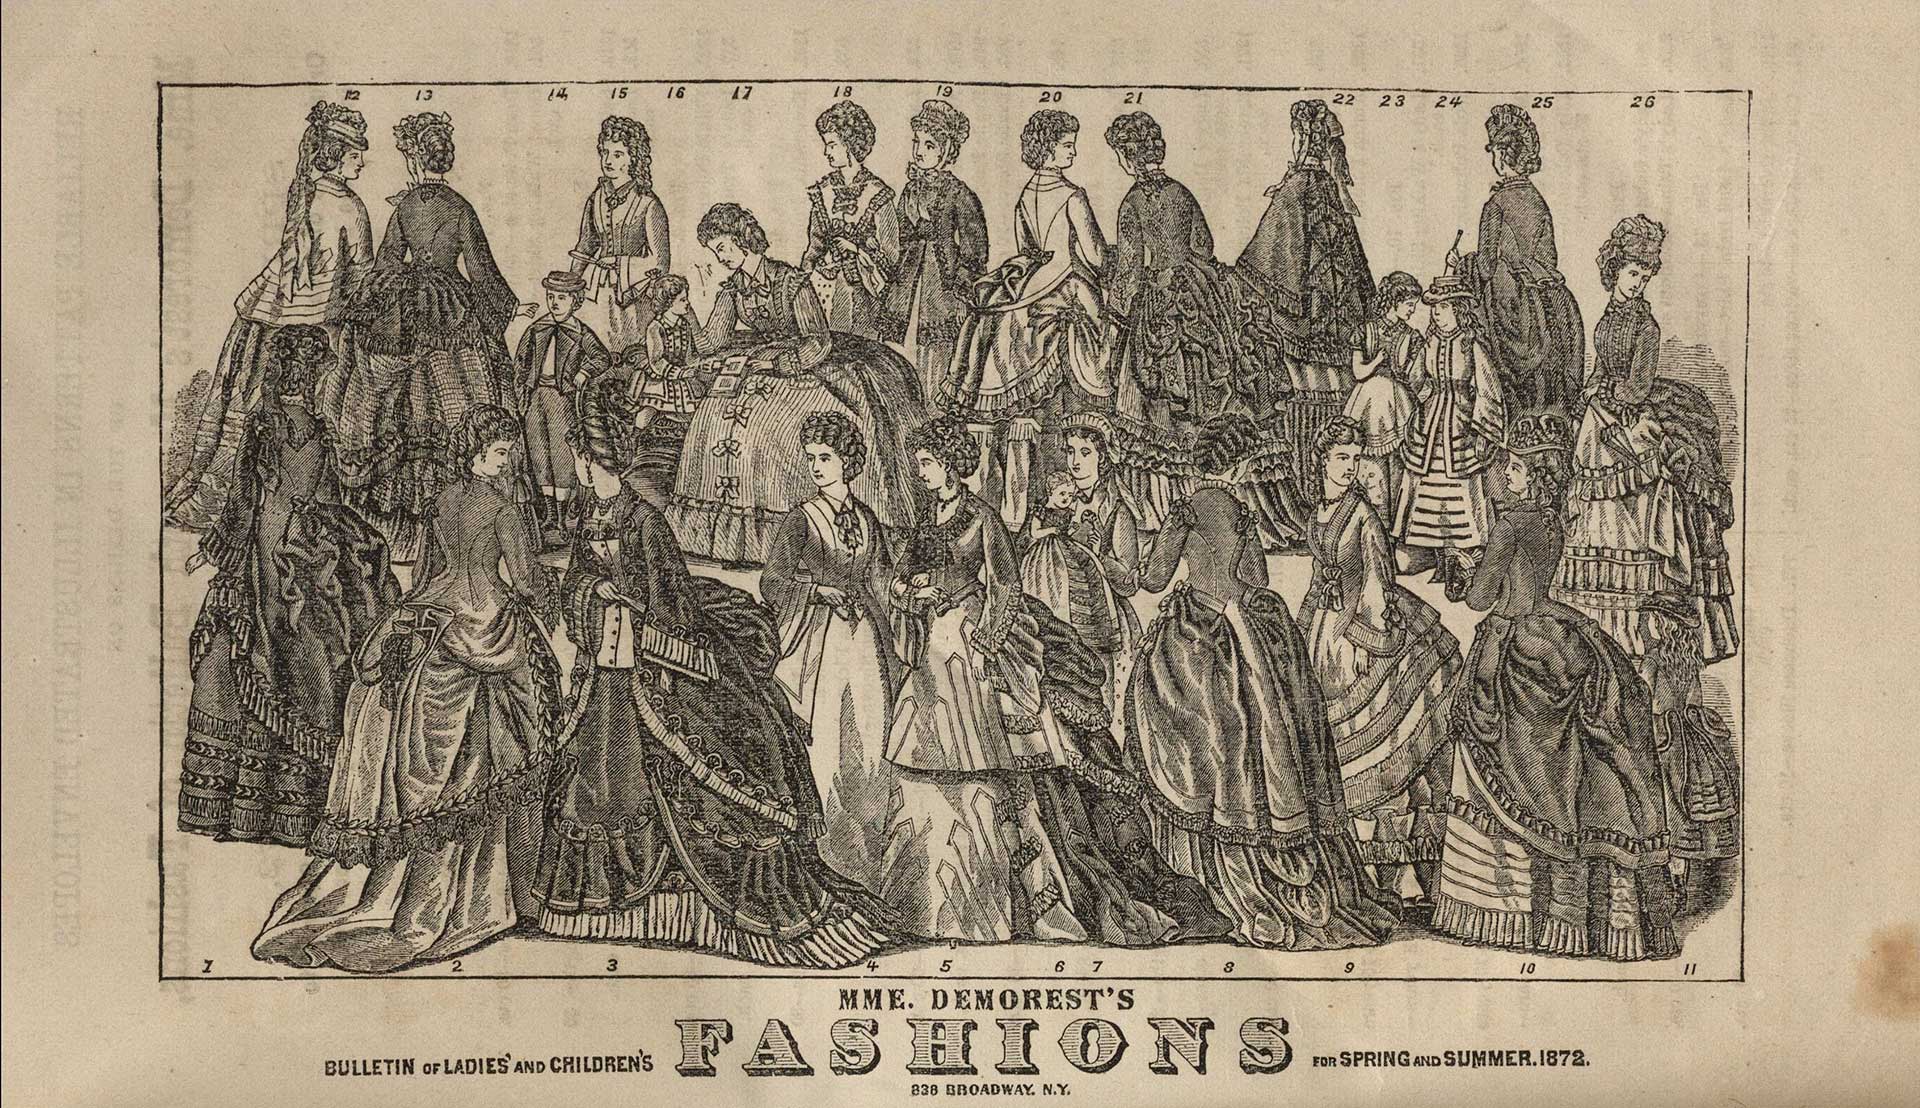 From: Mme. Demorest (Ellen Louise Curtis), Just what every lady, milliner, dressmaker, and merchant wants to know about--the spring and summer fashions! What to wear and how to make it: Mme Demorest's semi-annual book of instructions on dress and dressmaking for the spring and summer of 1872, contains unusual attractions, among which is a miniature illustration of Mme. Demorest's large and elegant bulletin of fashions (1872)